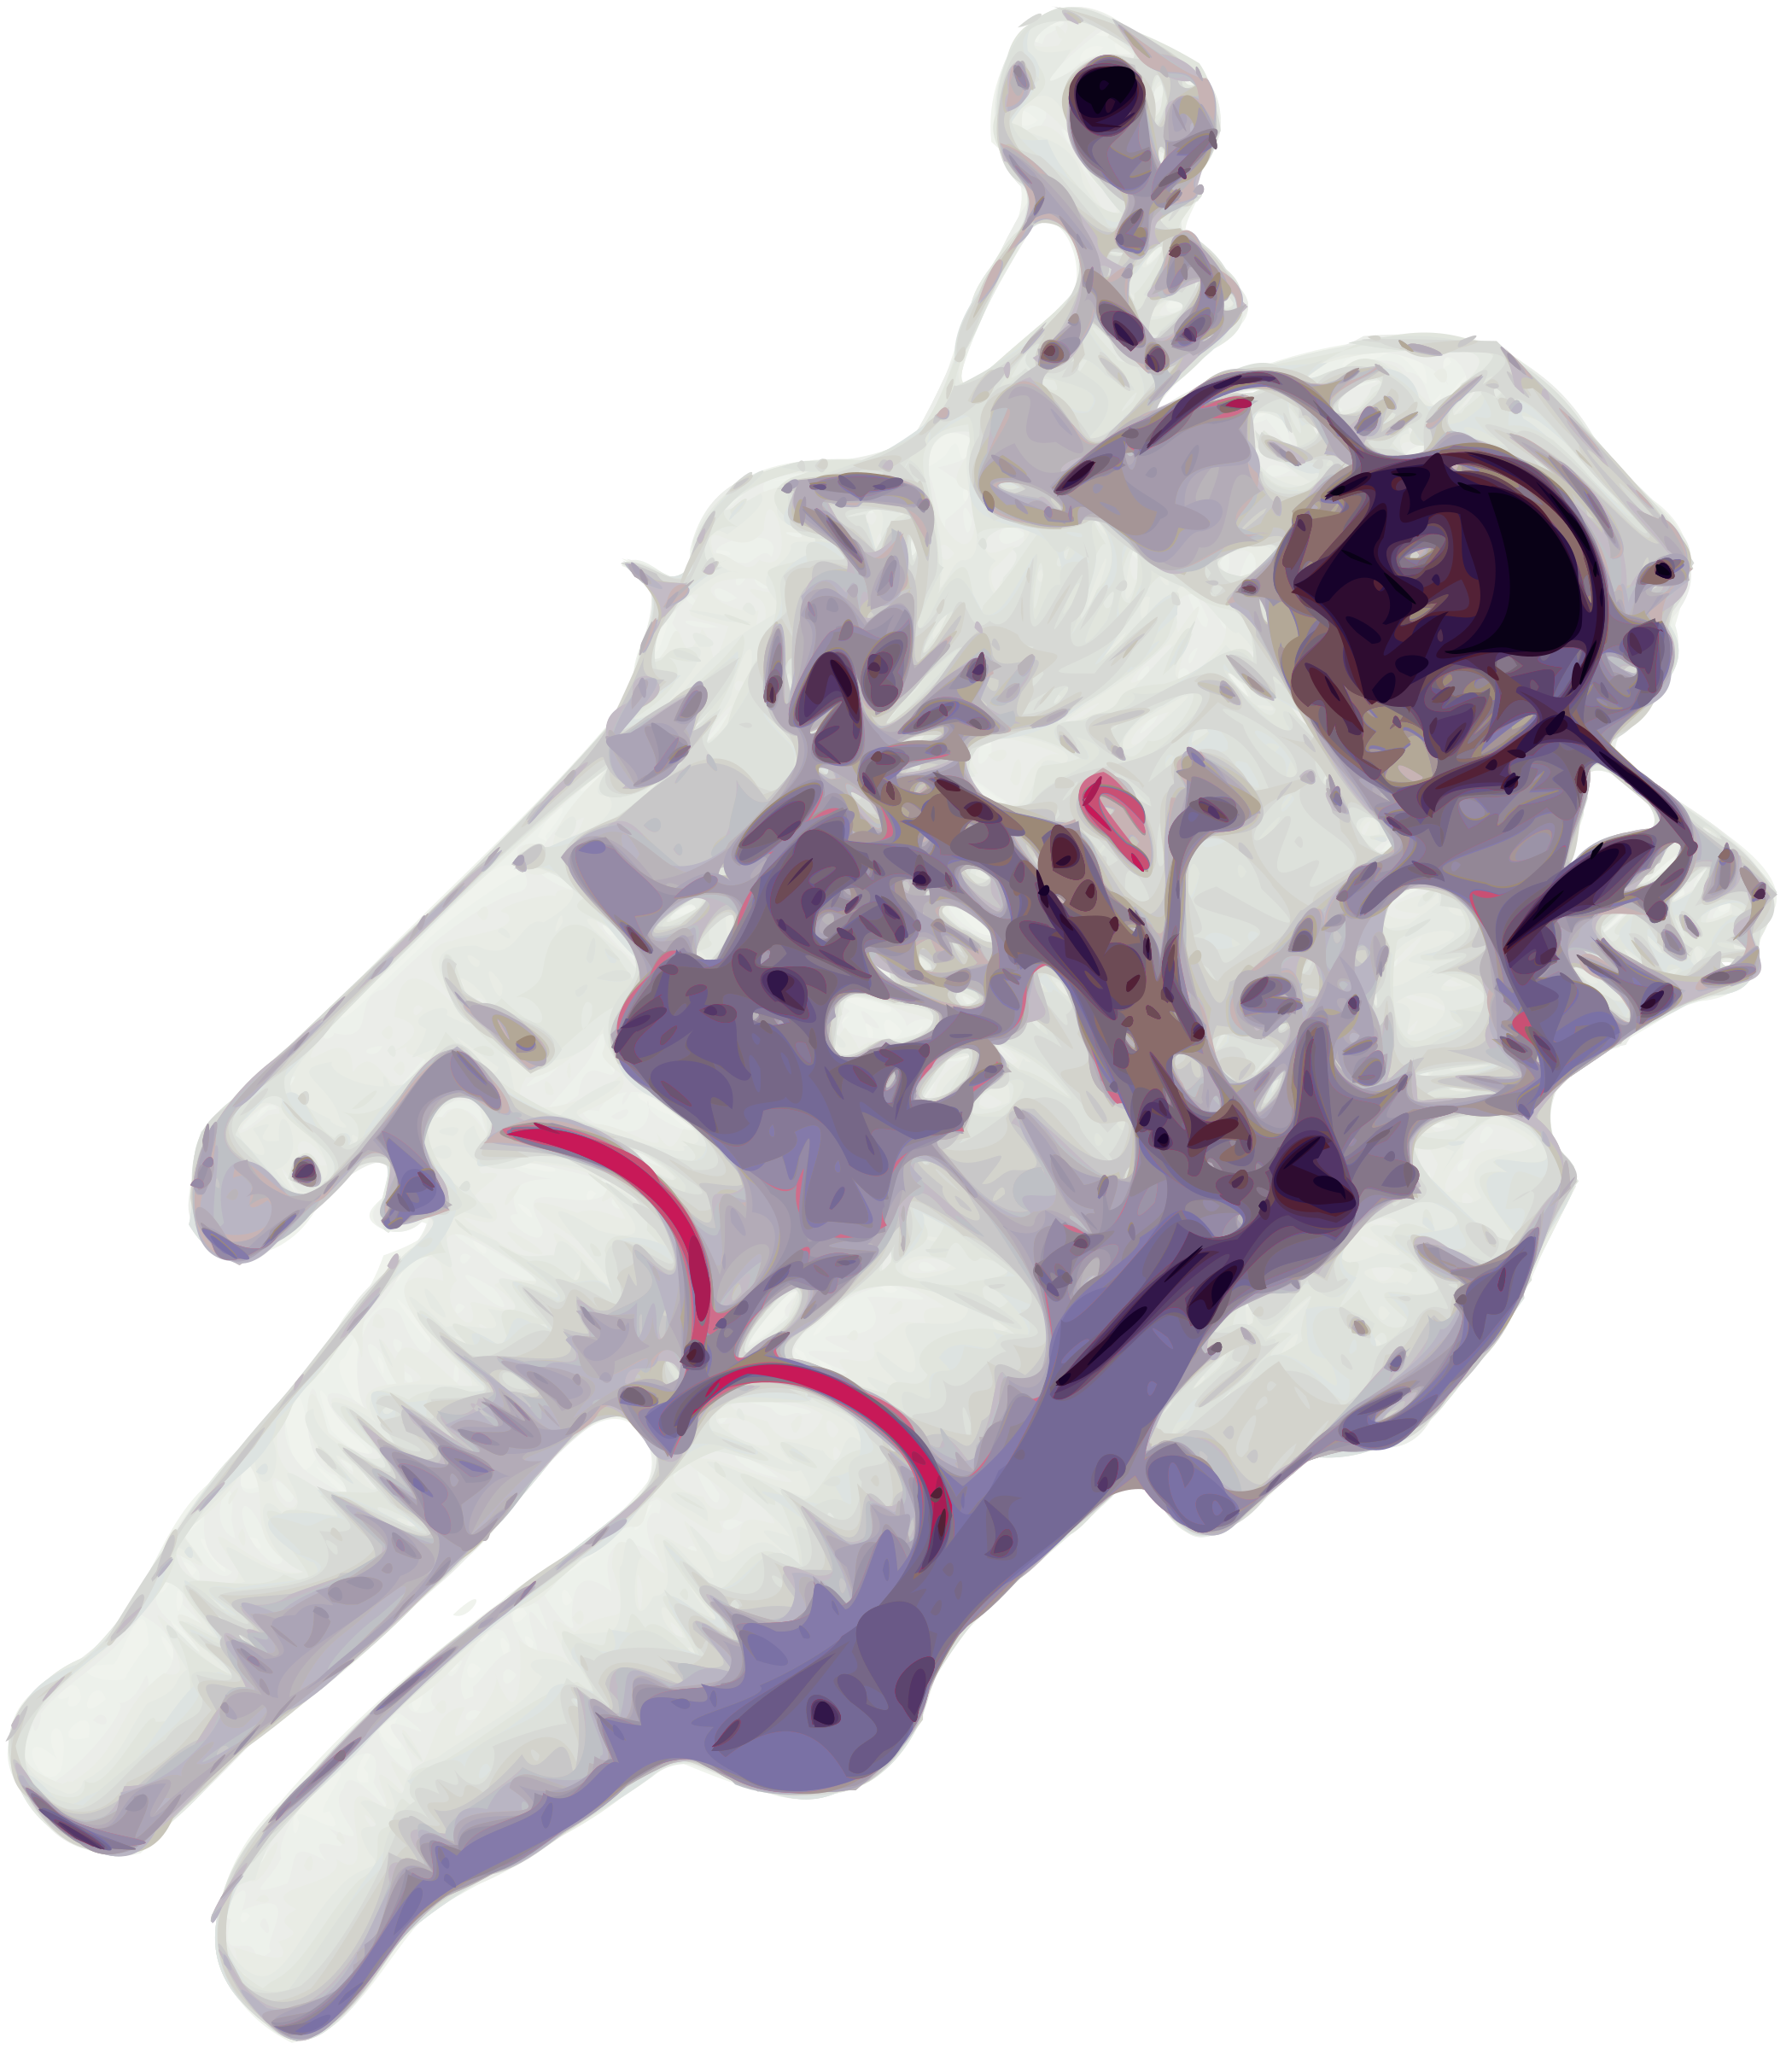 Spaceman PNG HD Transparent Spaceman HD.PNG Images. | PlusPNG